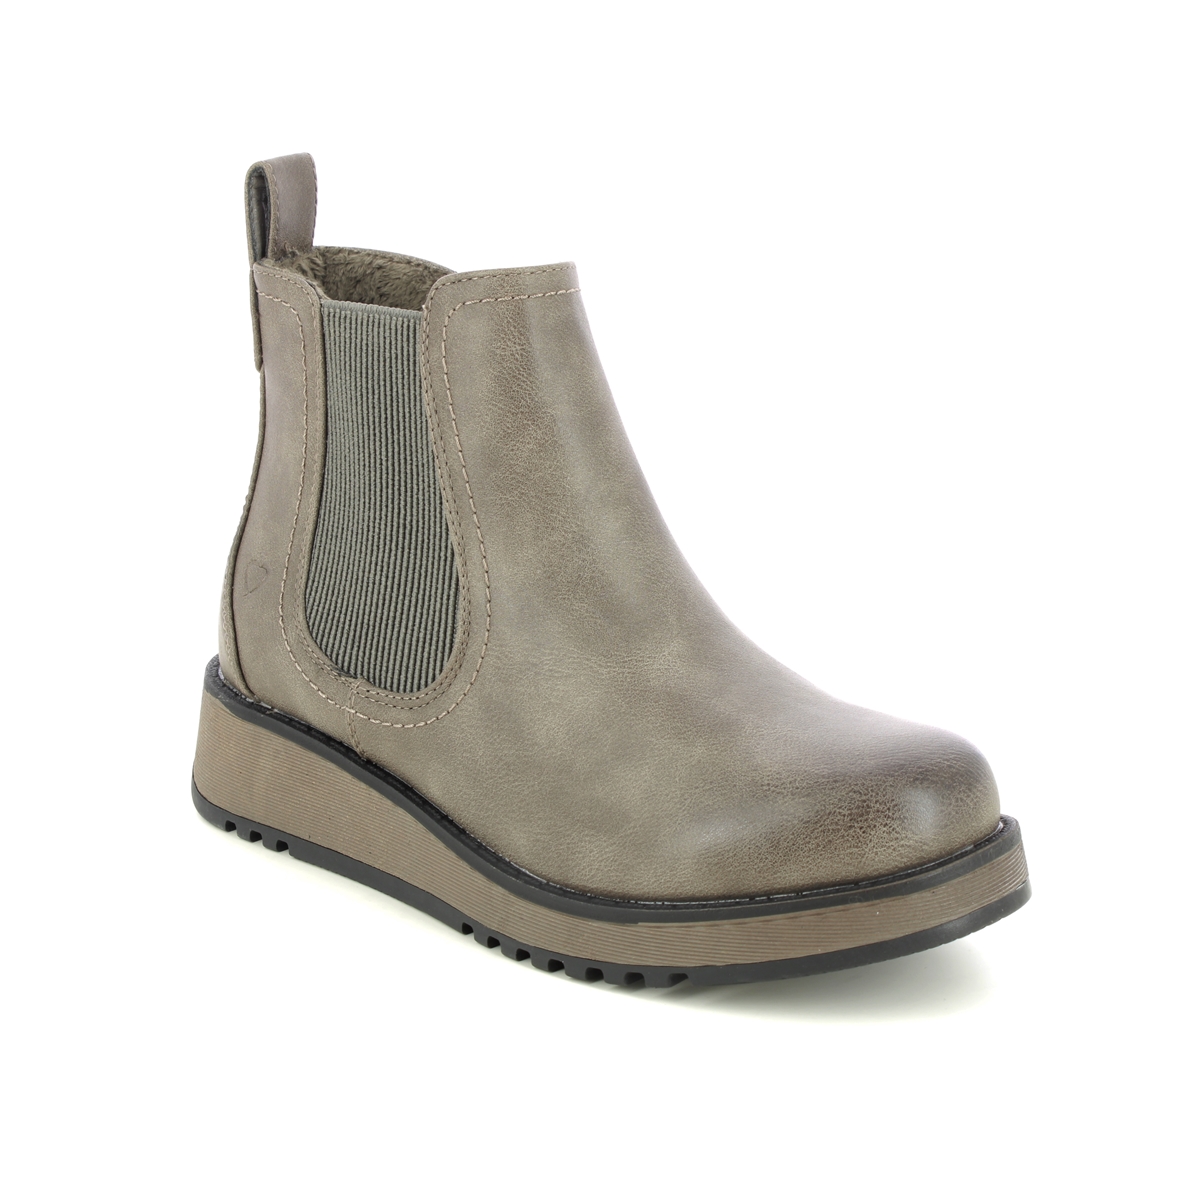 Heavenly Feet Rolo   2 New Dark Taupe Womens Chelsea Boots 3503-50 In Size 7 In Plain Dark Taupe